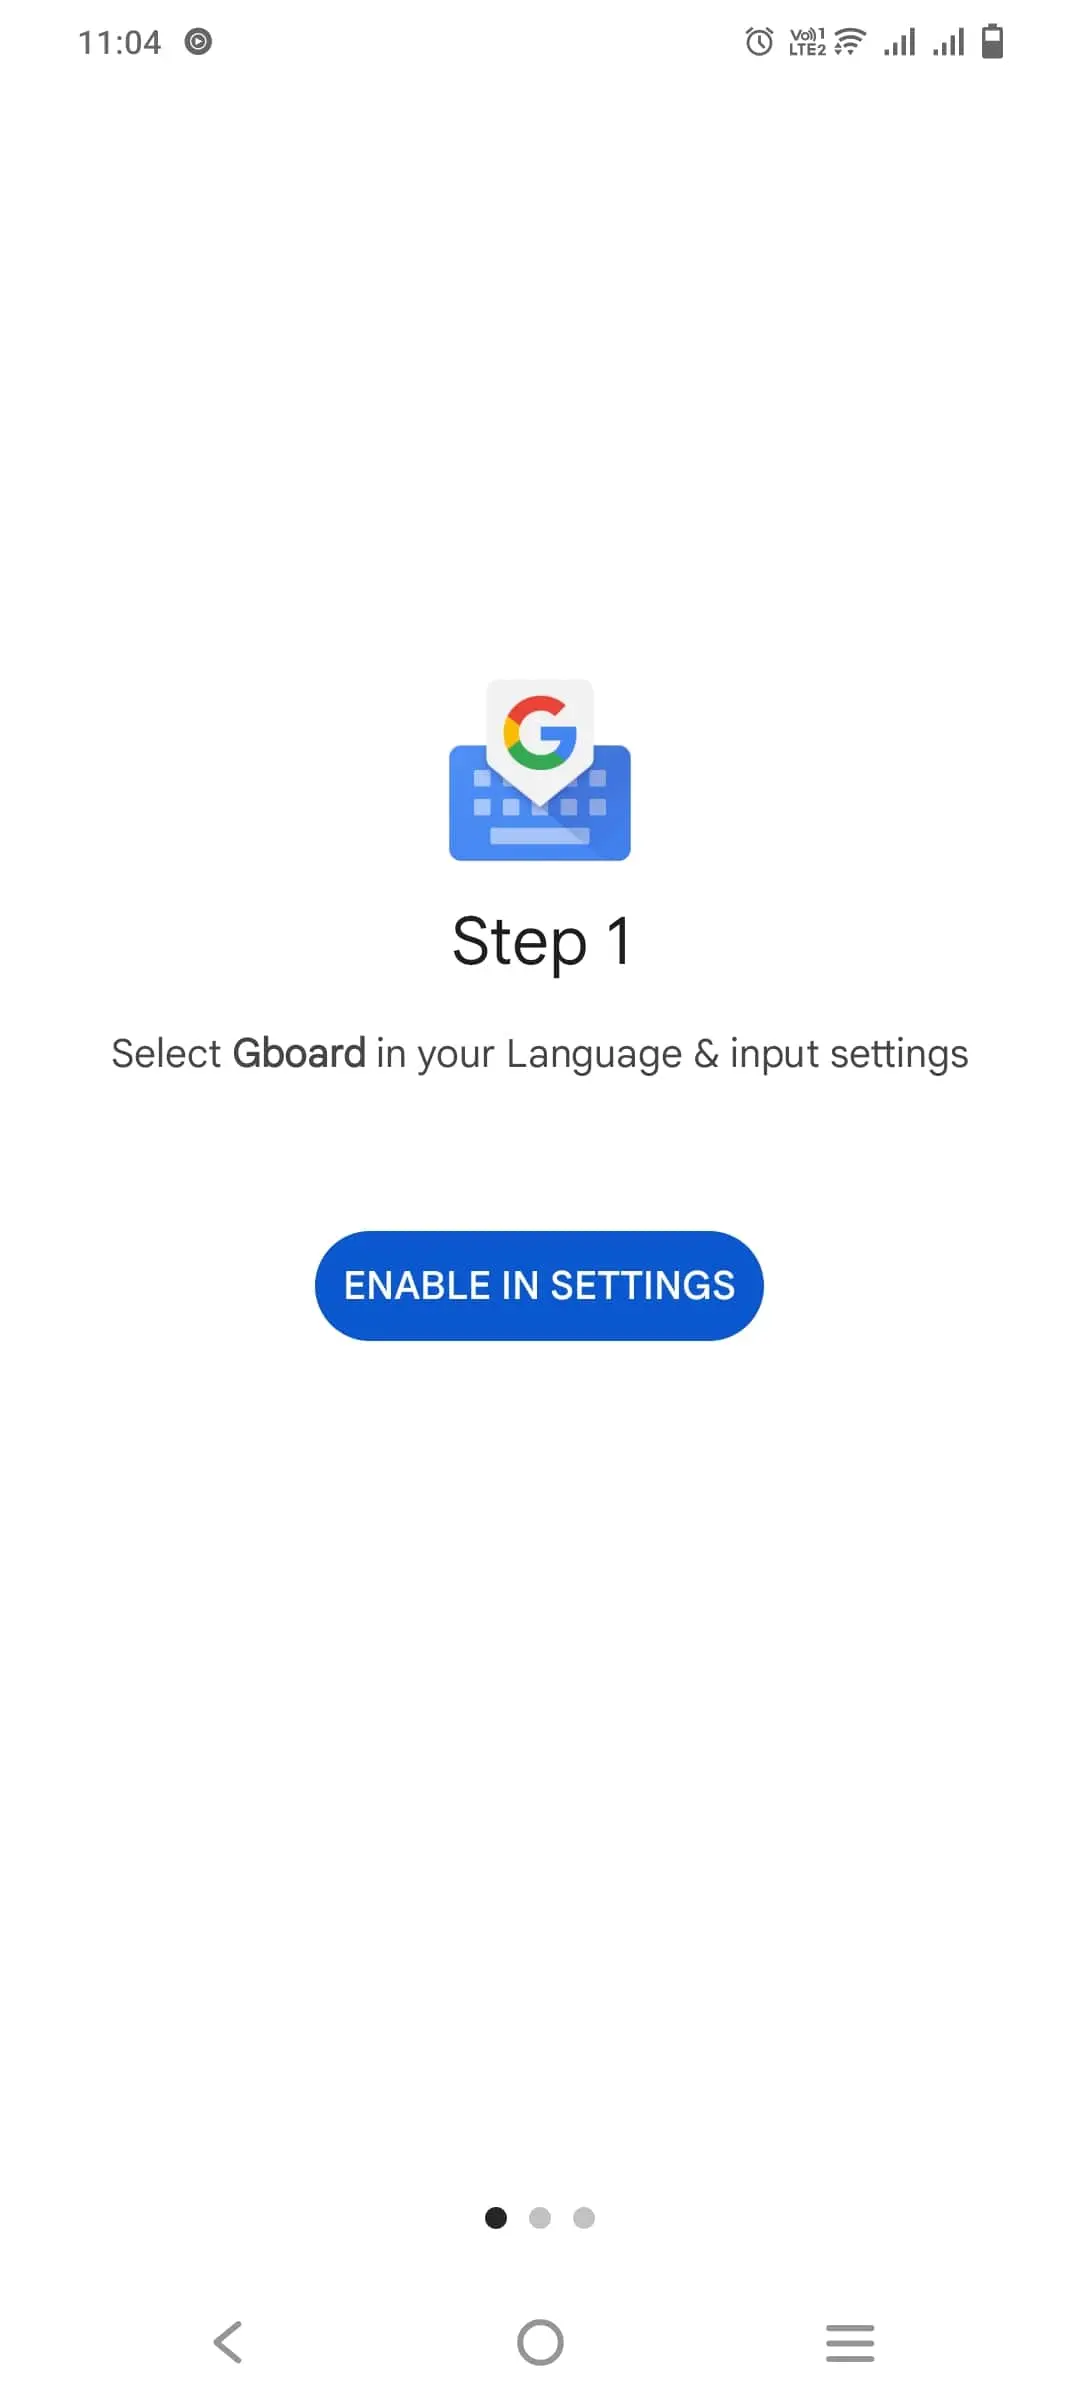 Enable Gboard typing in mobile